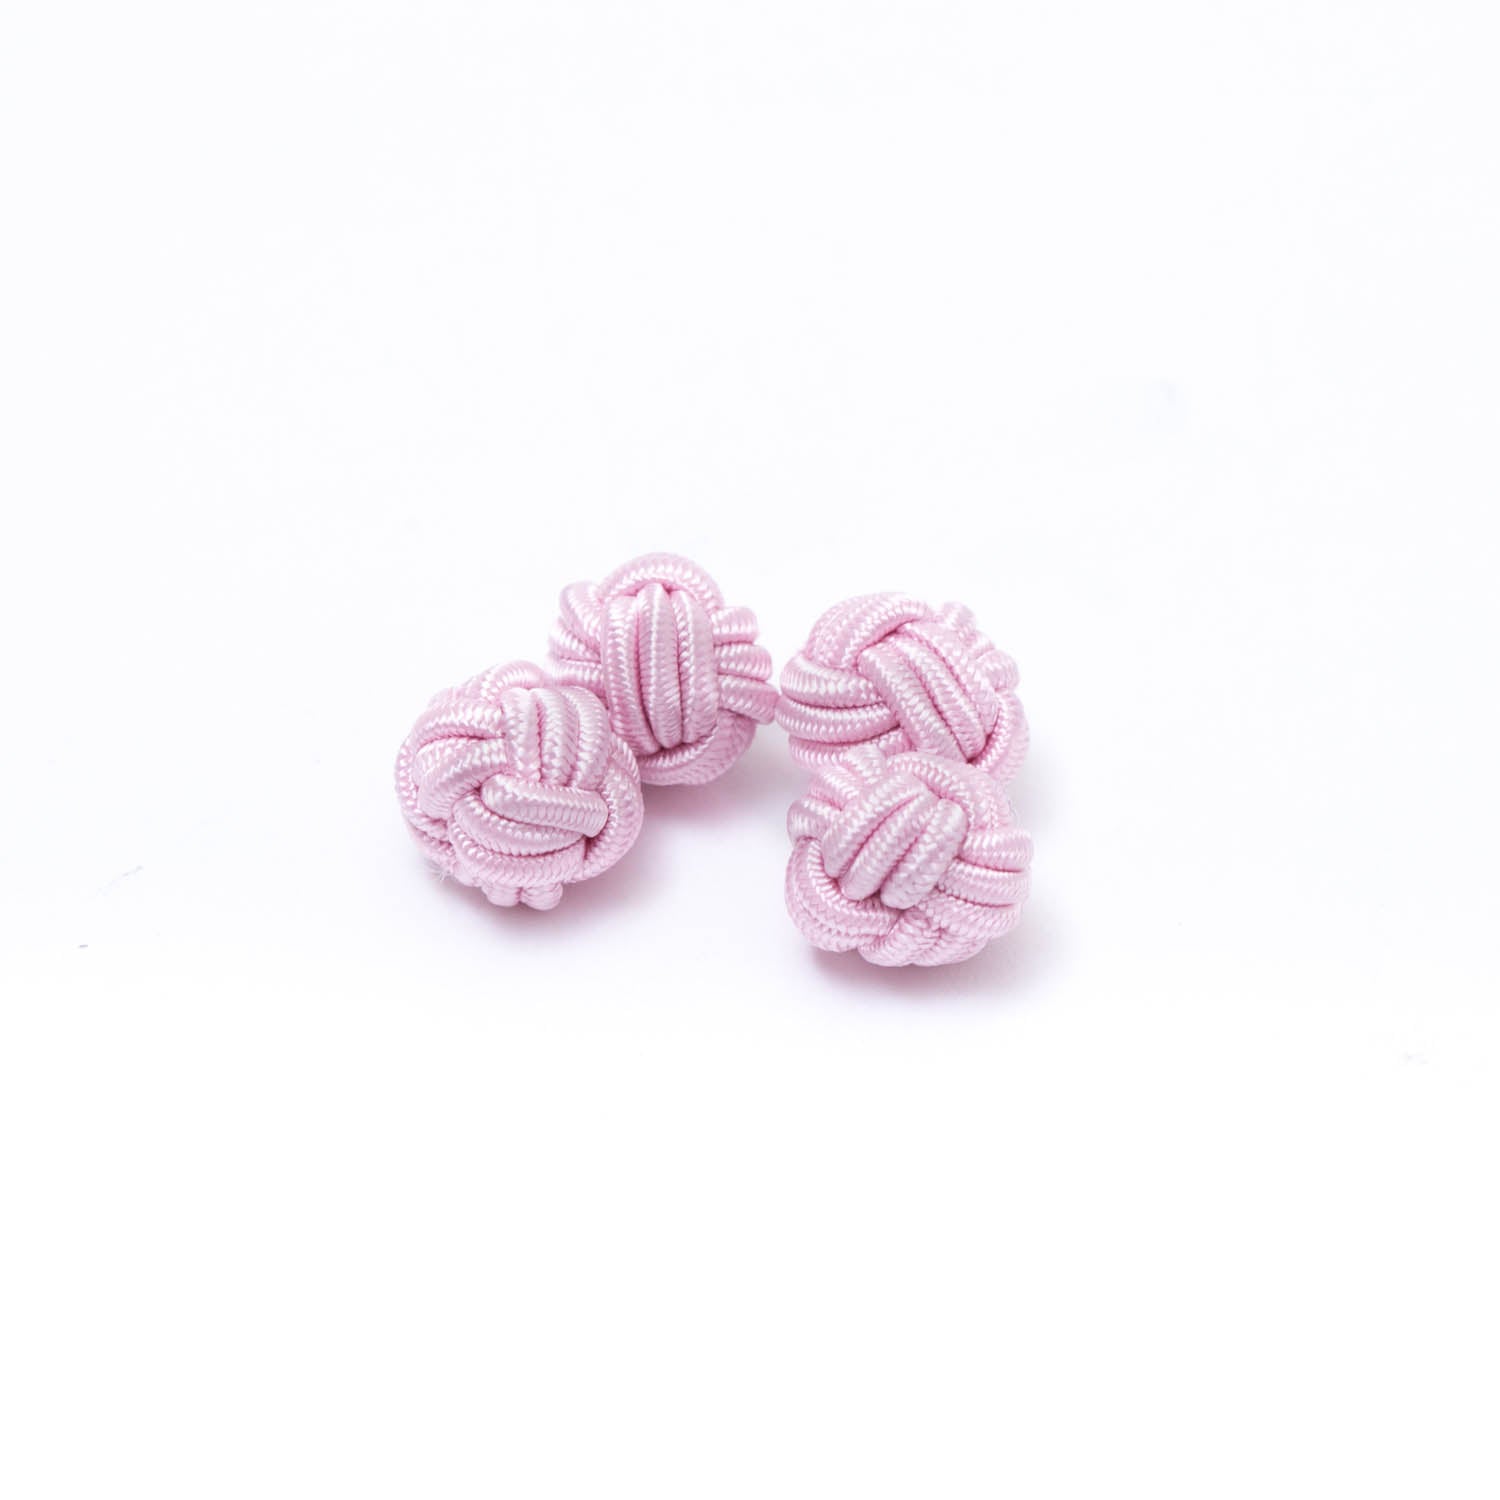 A group of handmade pink knotted Solid Knot Cuff Links by KirbyAllison.com on a white surface.